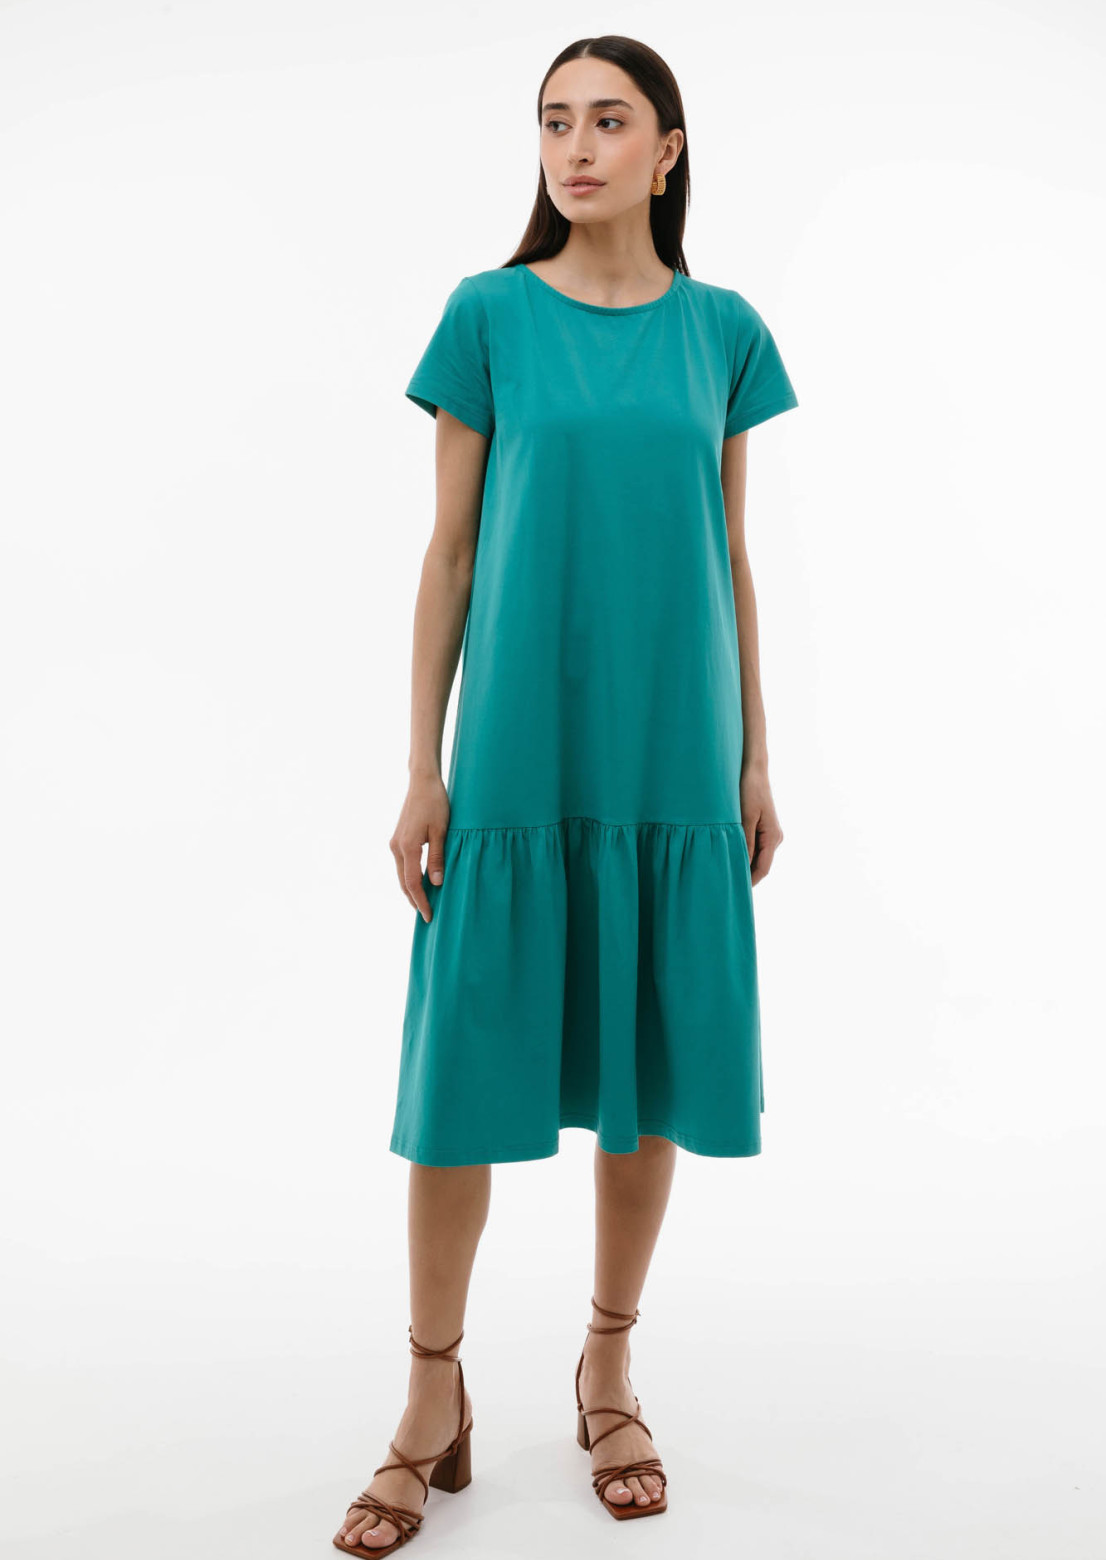 Turquoise t-shirt-dress with a flounce